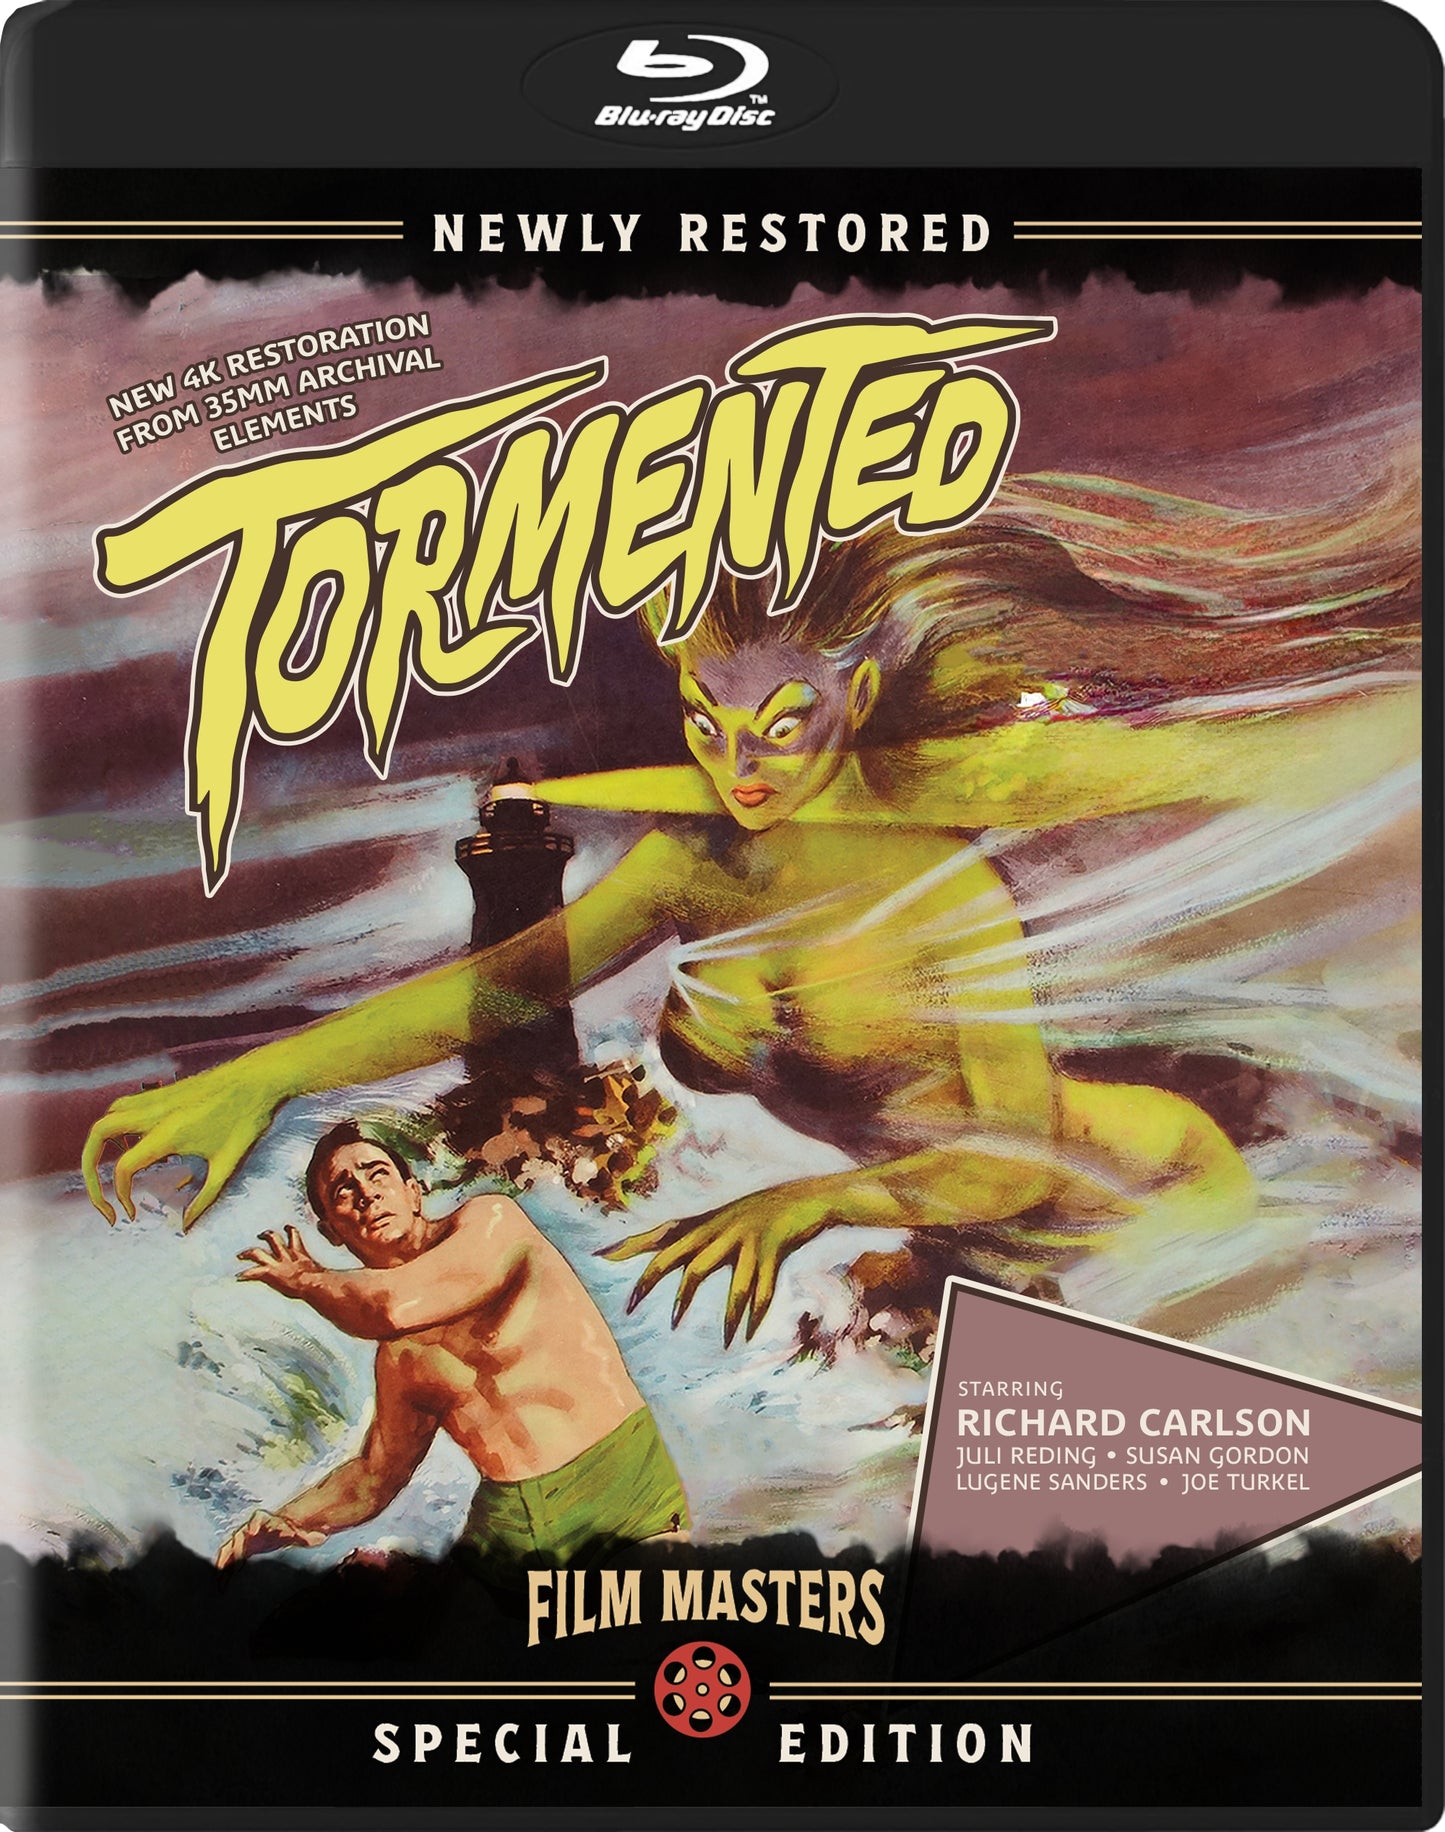 Tormented (1960) Blu-ray (Film Masters) [Preorder]